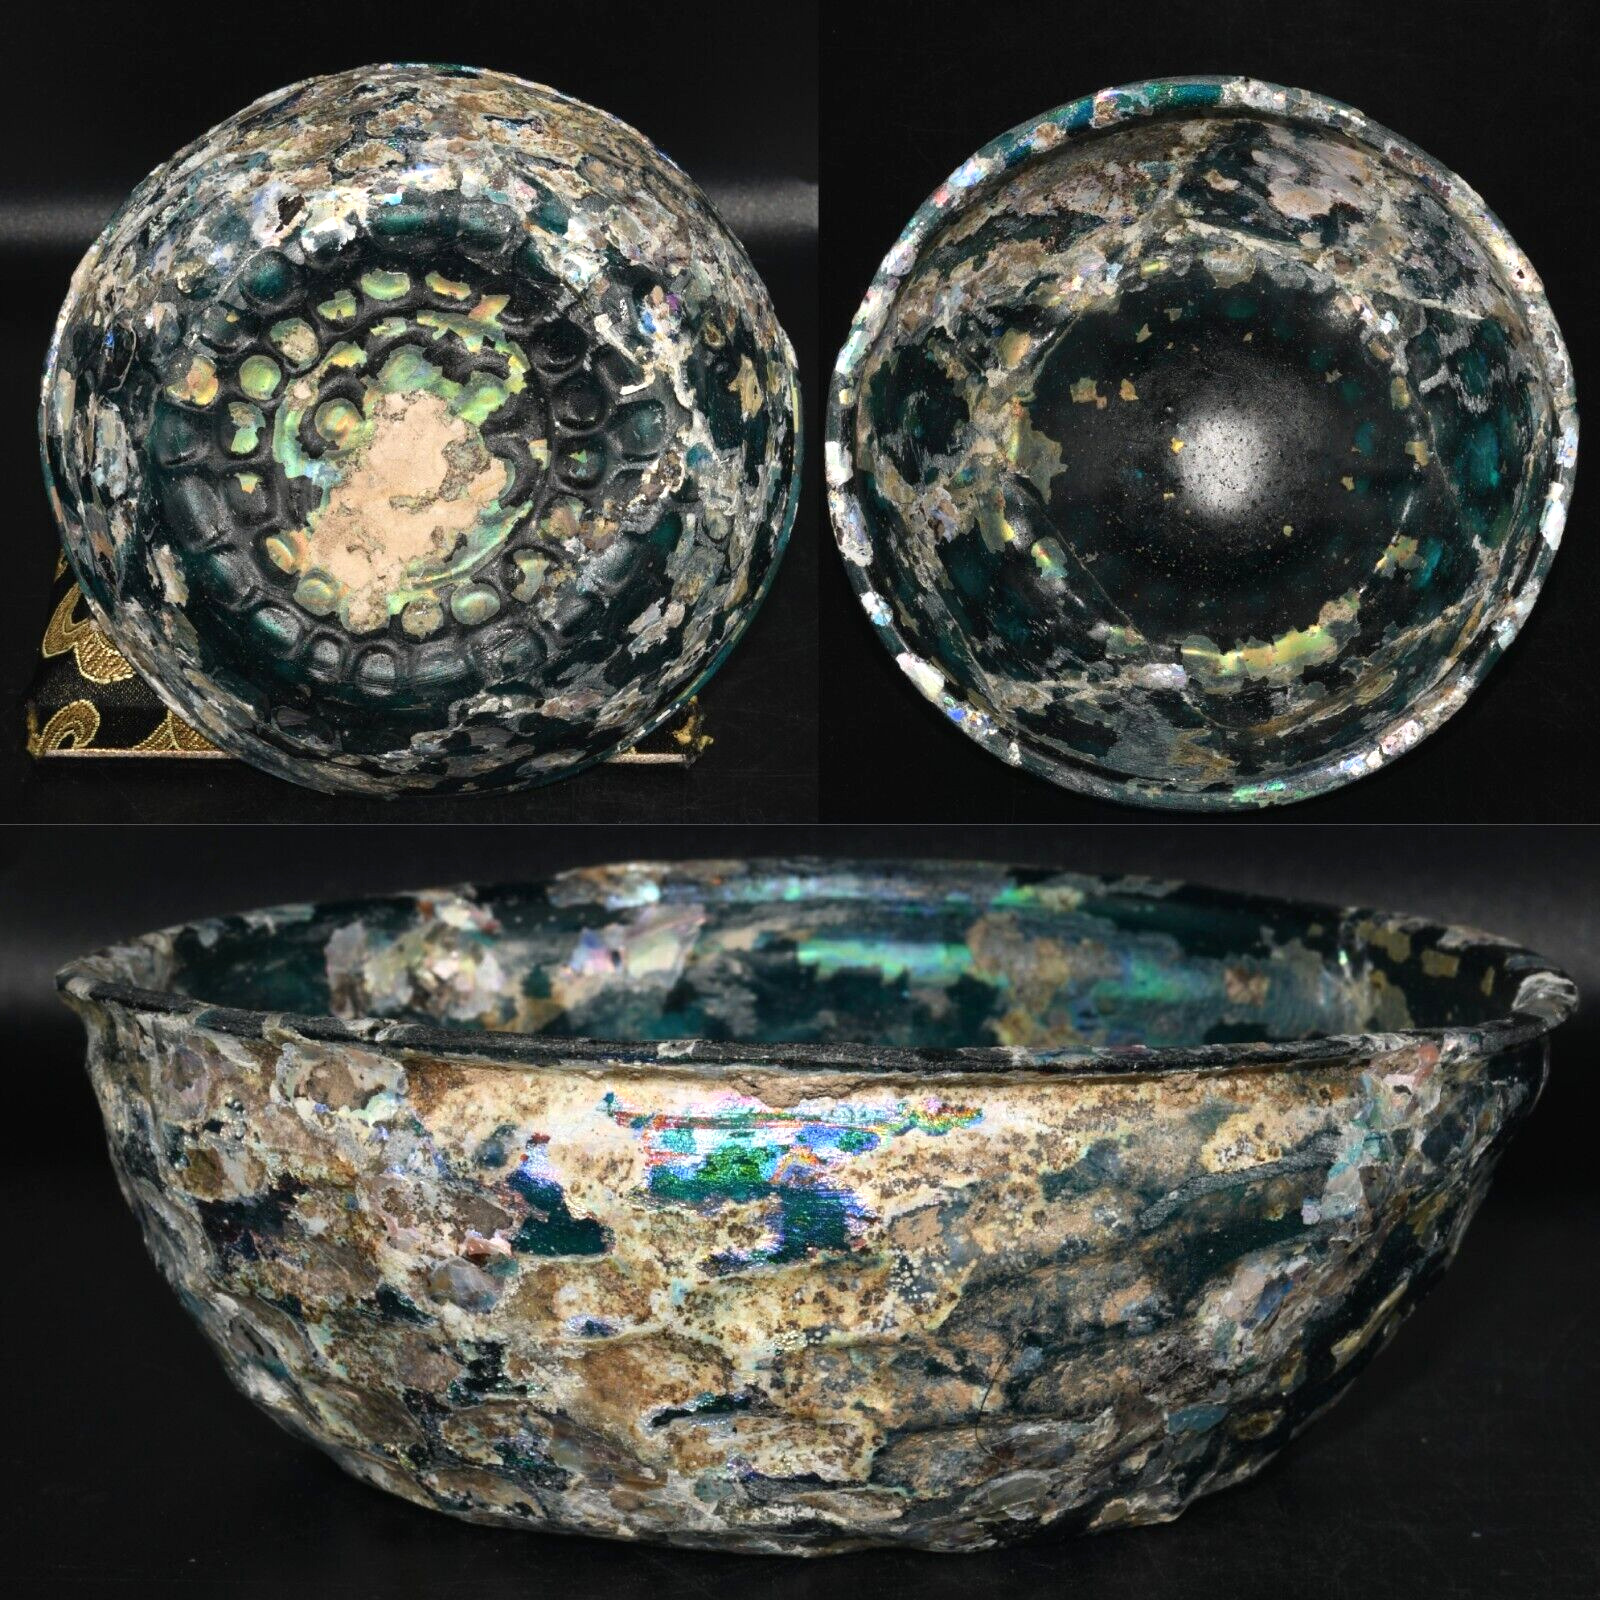 Rare Genuine Ancient Roman Facet Cup Glass Bowl with Iridescent Patina 2nd Cent